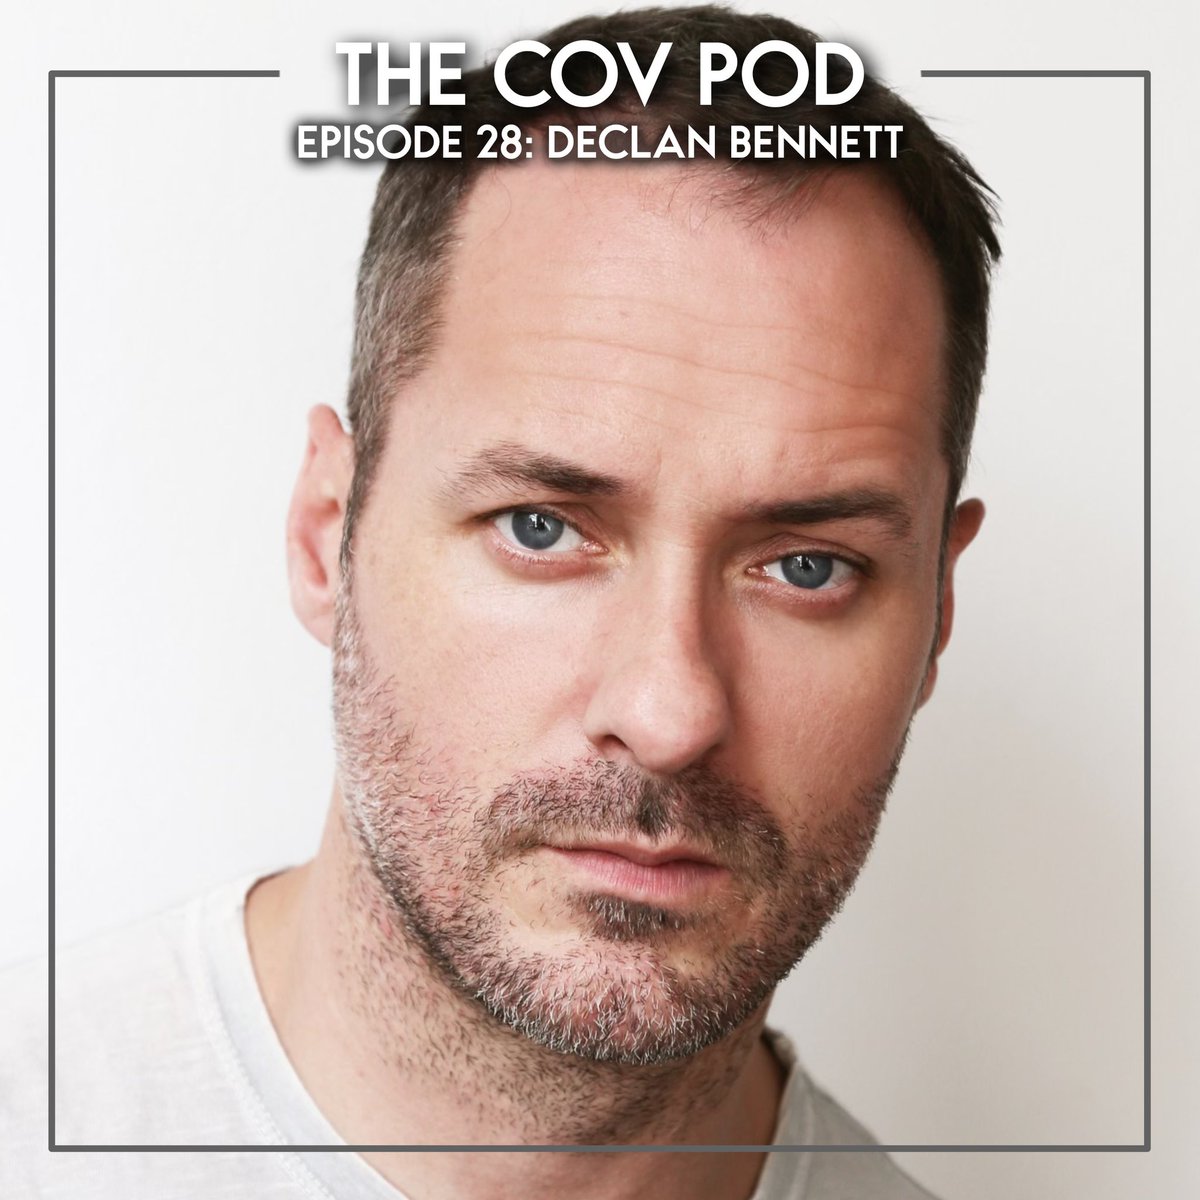 🎤 NEW COV POD EPISODE ALERT 🎤 We find ourselves a couple of days before the @BelgradeTheatre debut of Boy Out The City, the autobiographical show written and performed by Coventry lad, Declan Bennett (@thisainttherapy). Listen to the episode over at thecovpod.co.uk